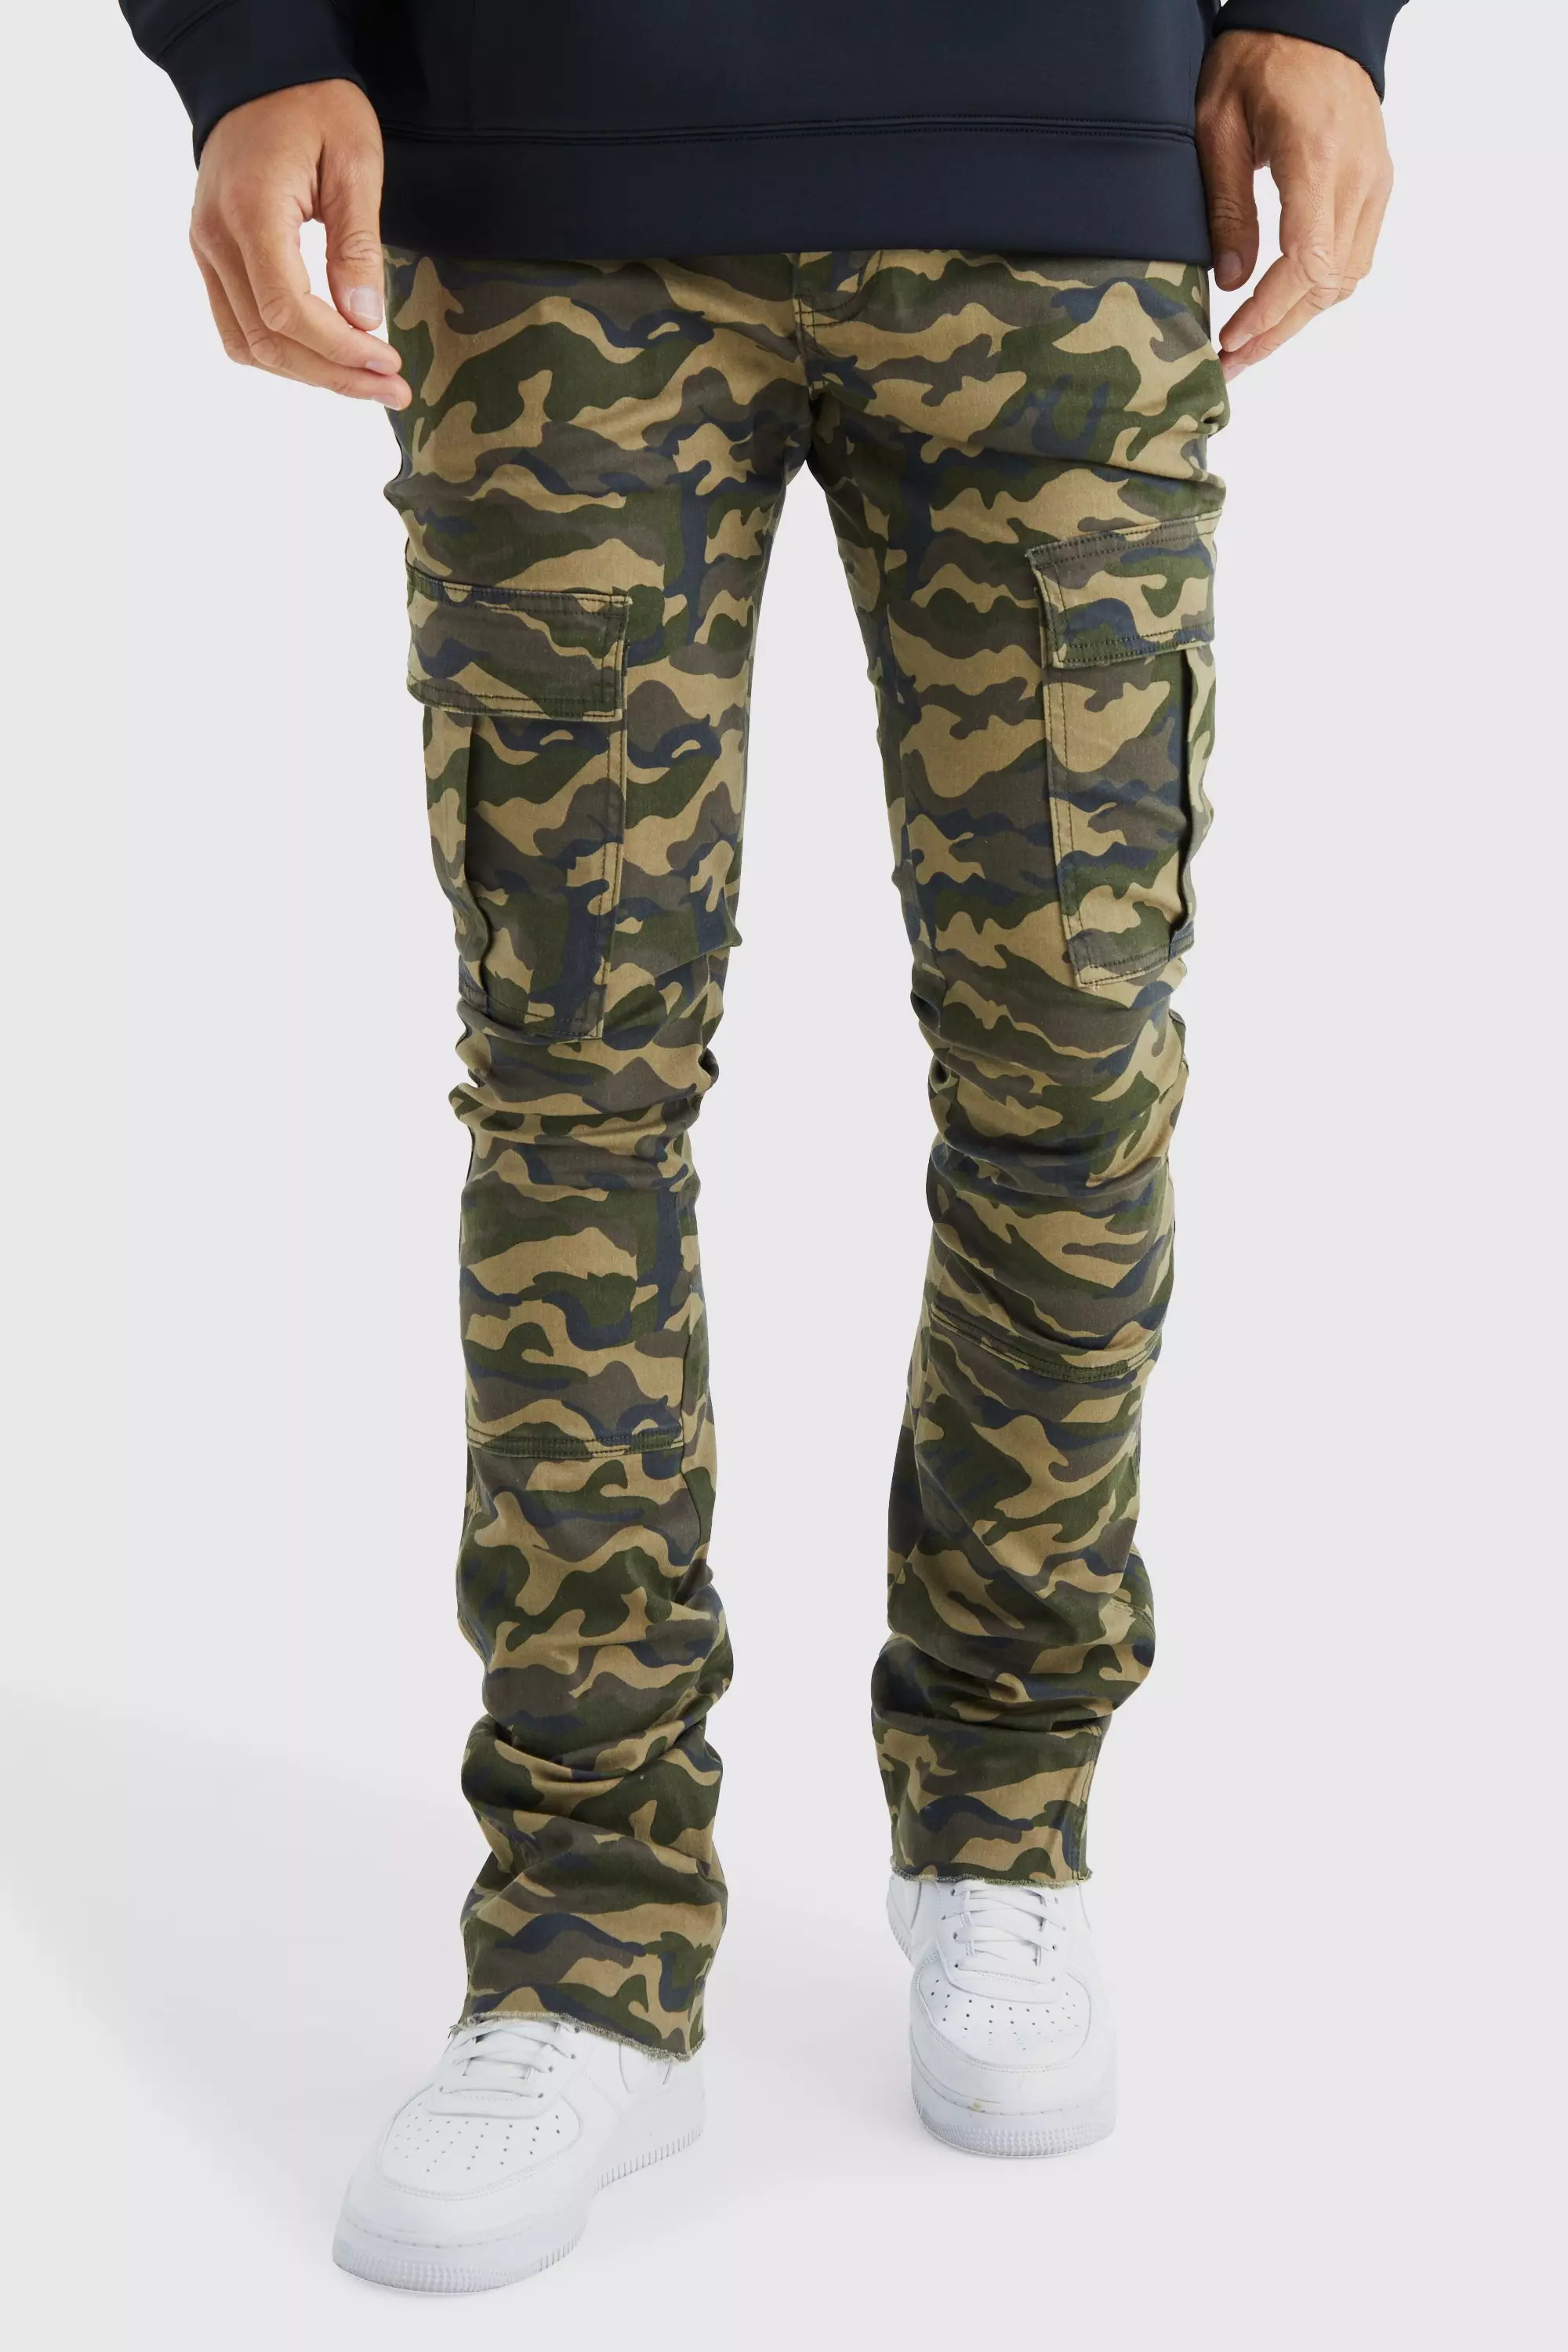 Sand Beige Tall Skinny Stacked Flare Gusset Camo Cargo Pants